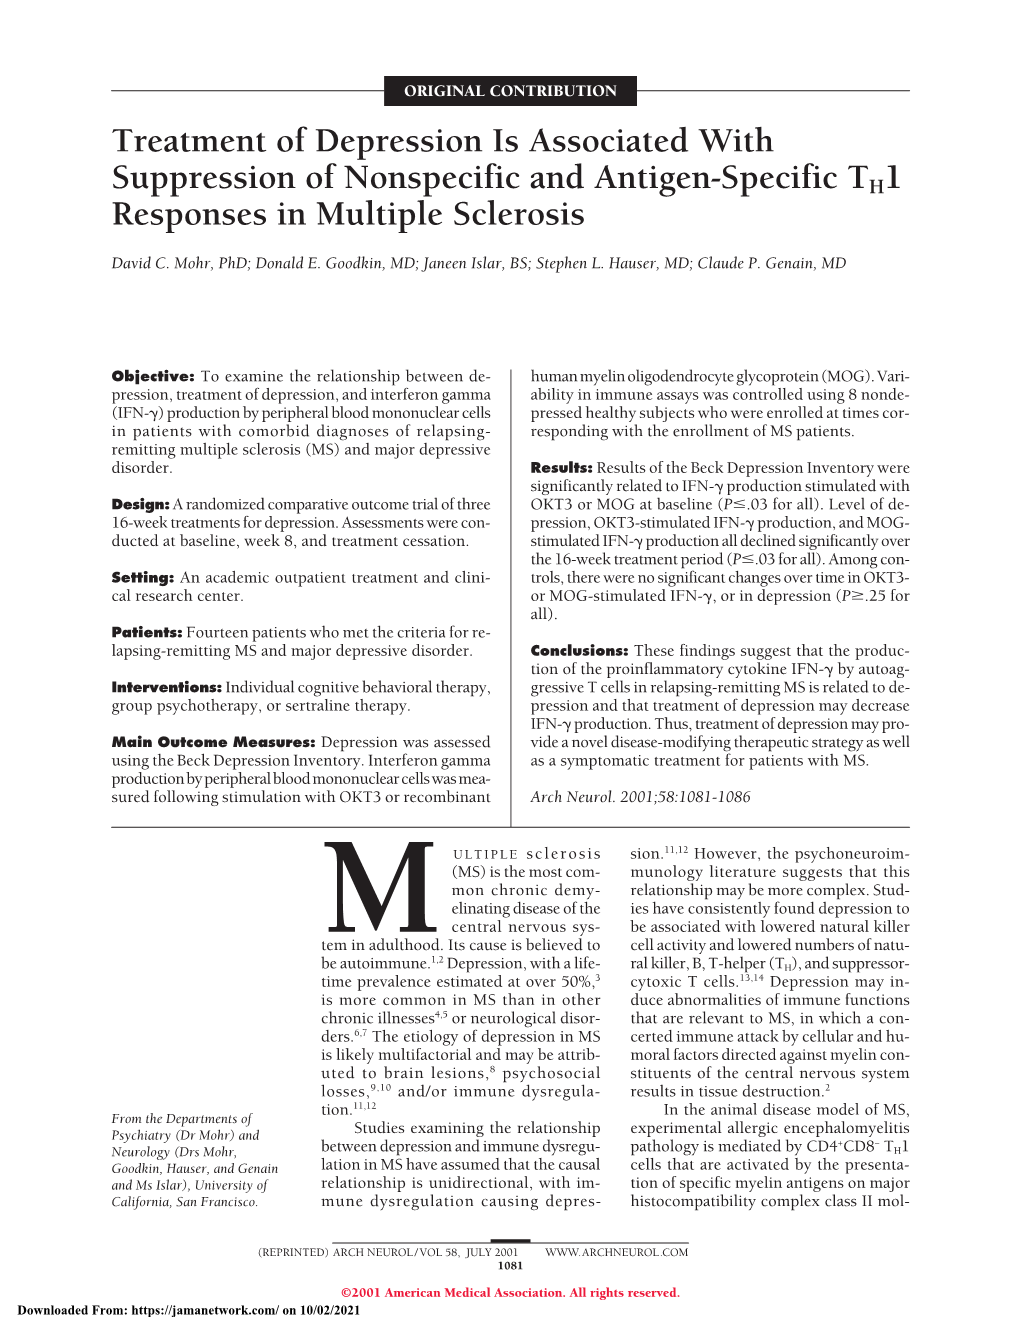 Treatment of Depression Is Associated with Suppression of Nonspecific and Antigen-Specific TH1 Responses in Multiple Sclerosis